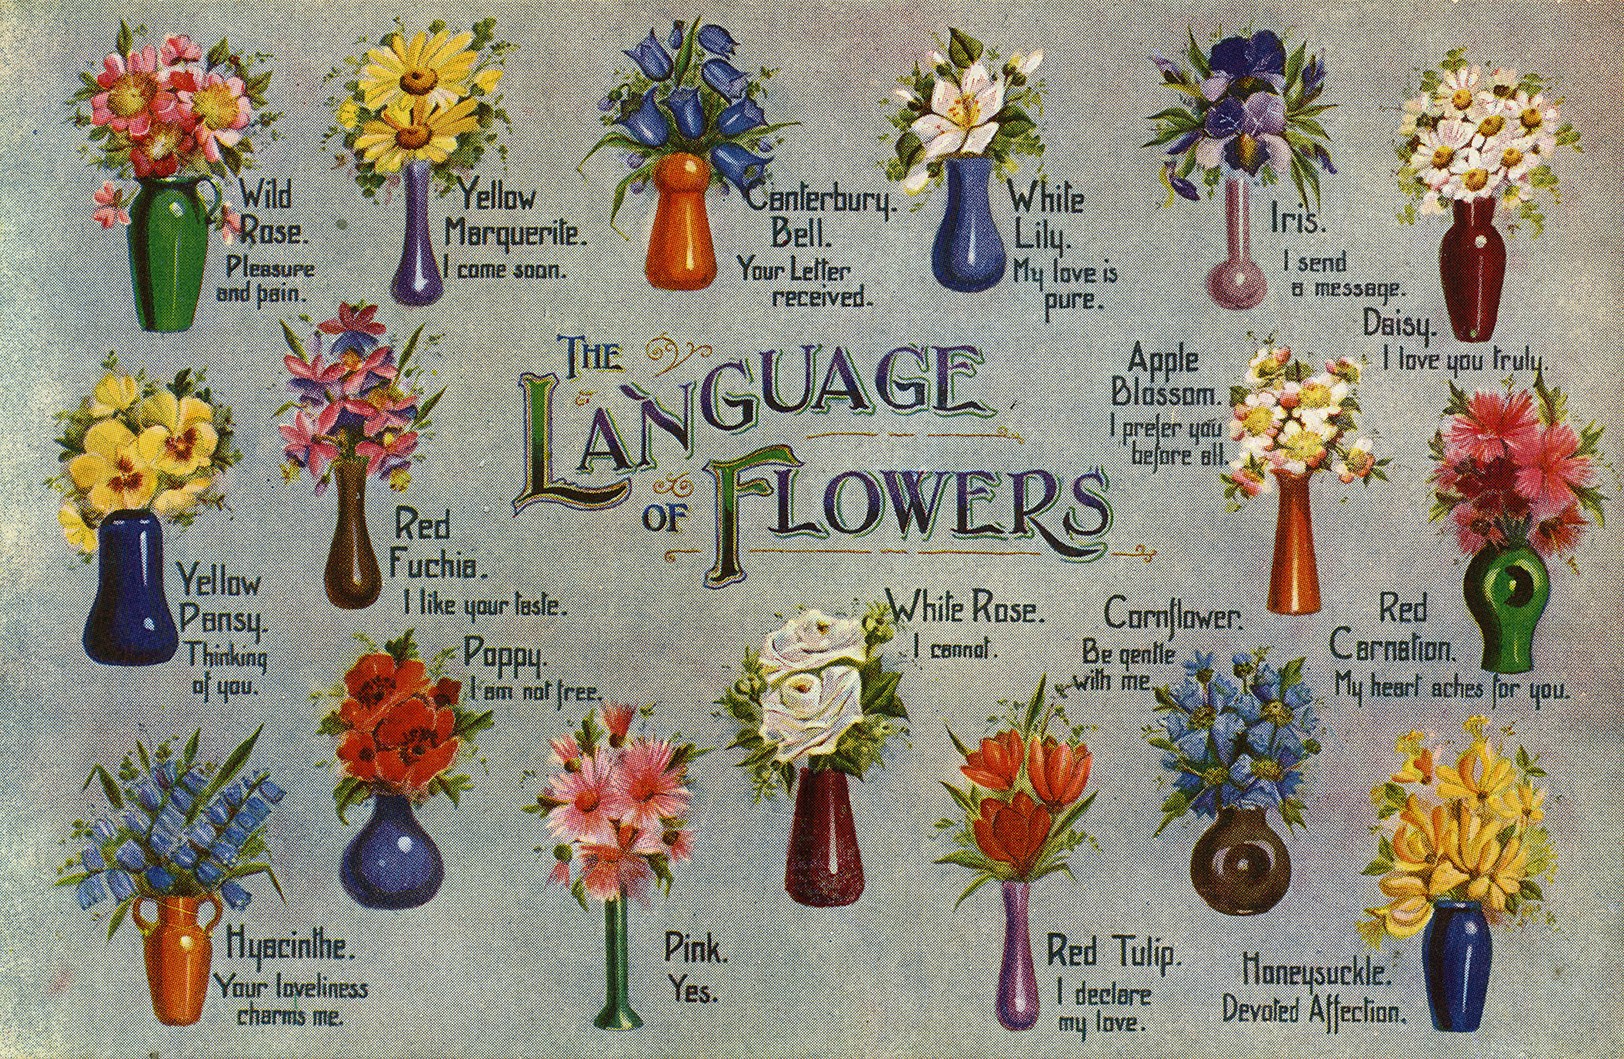 Flower Meanings Symbolism Of Flowers Herbs And More Plants The Old Farmer S Almanac